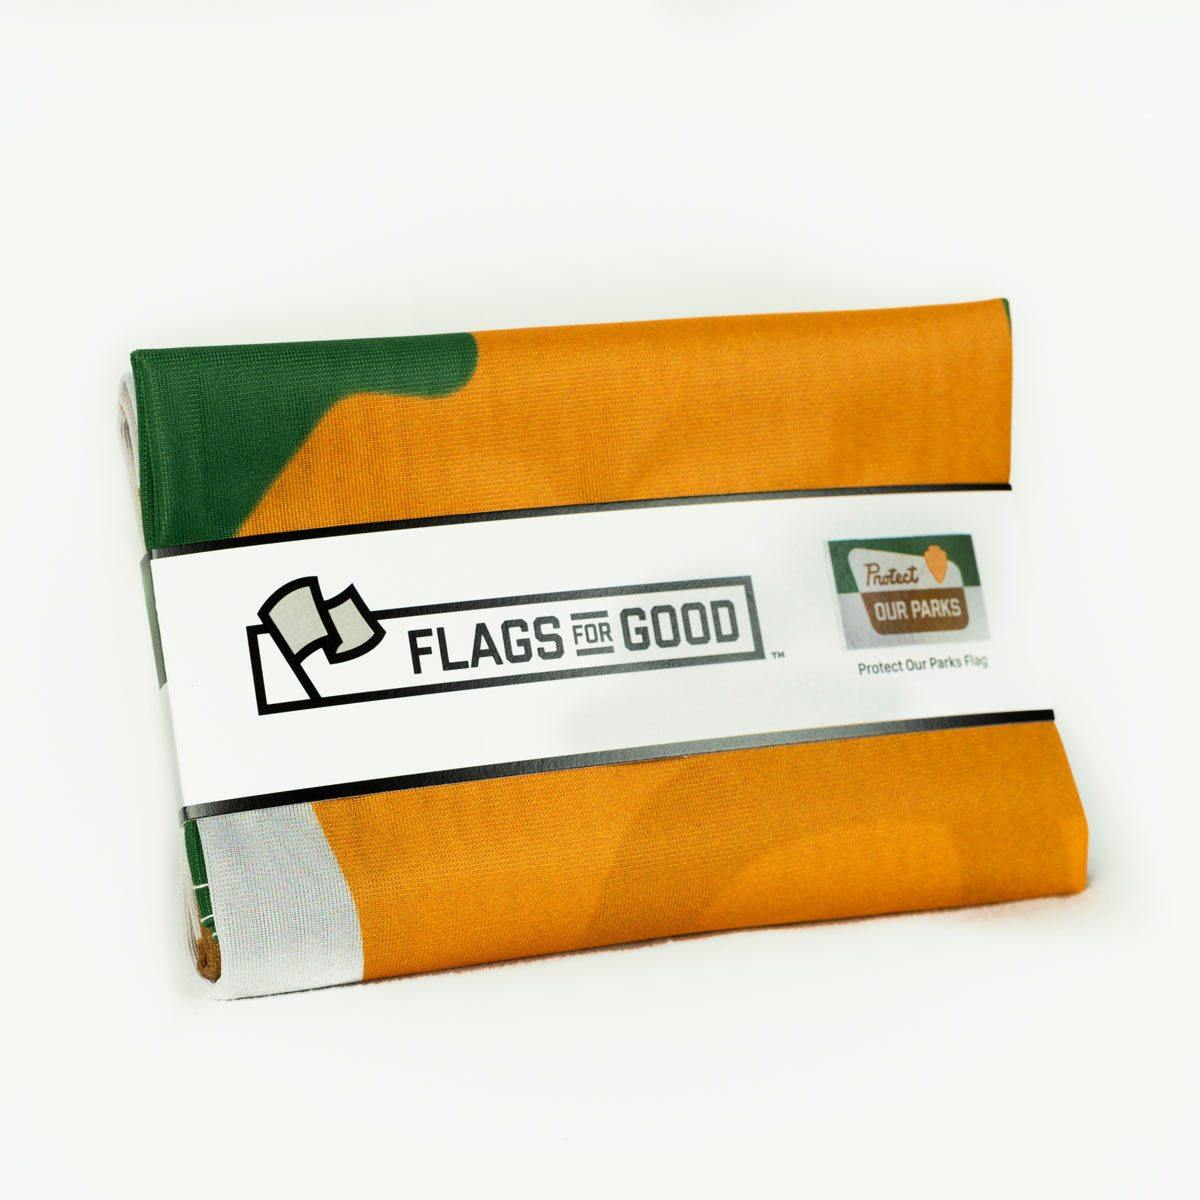 protect our parks flag in packaging